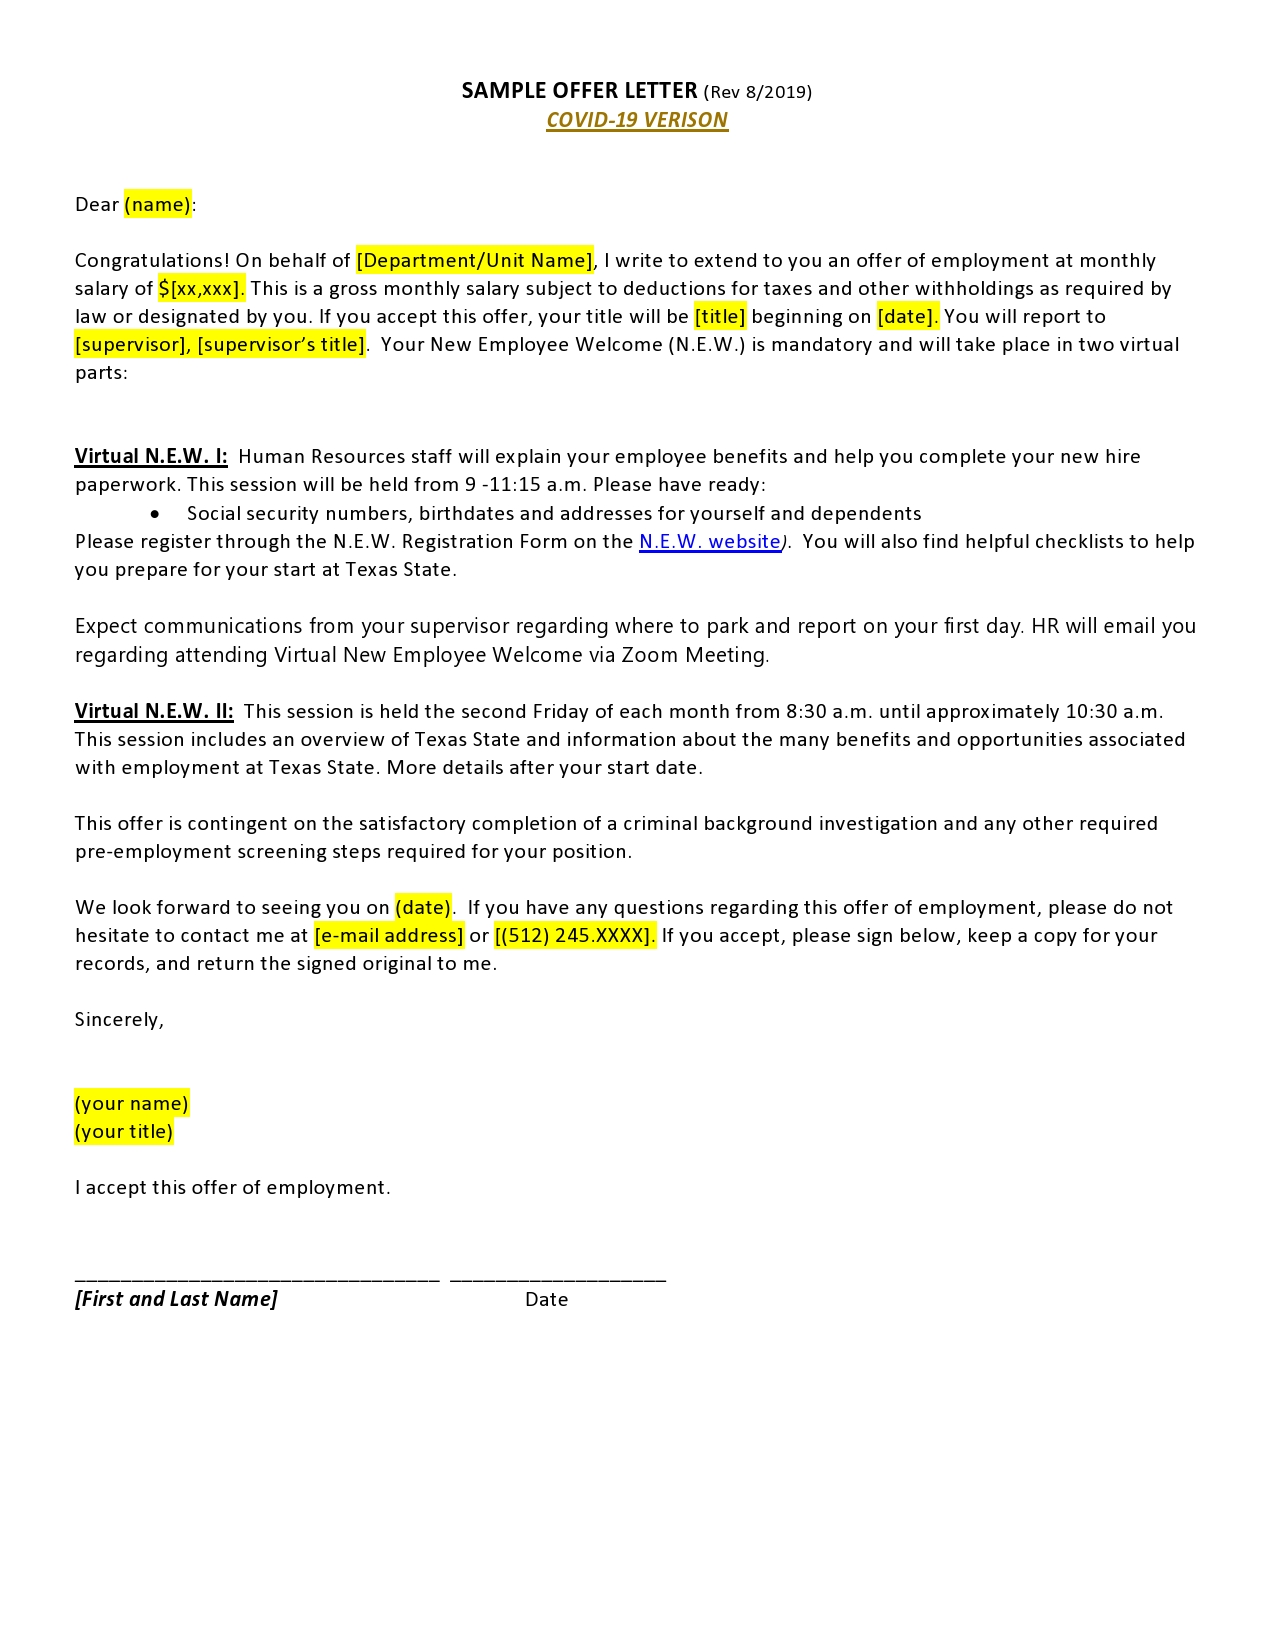 Free employment offer letter template 31